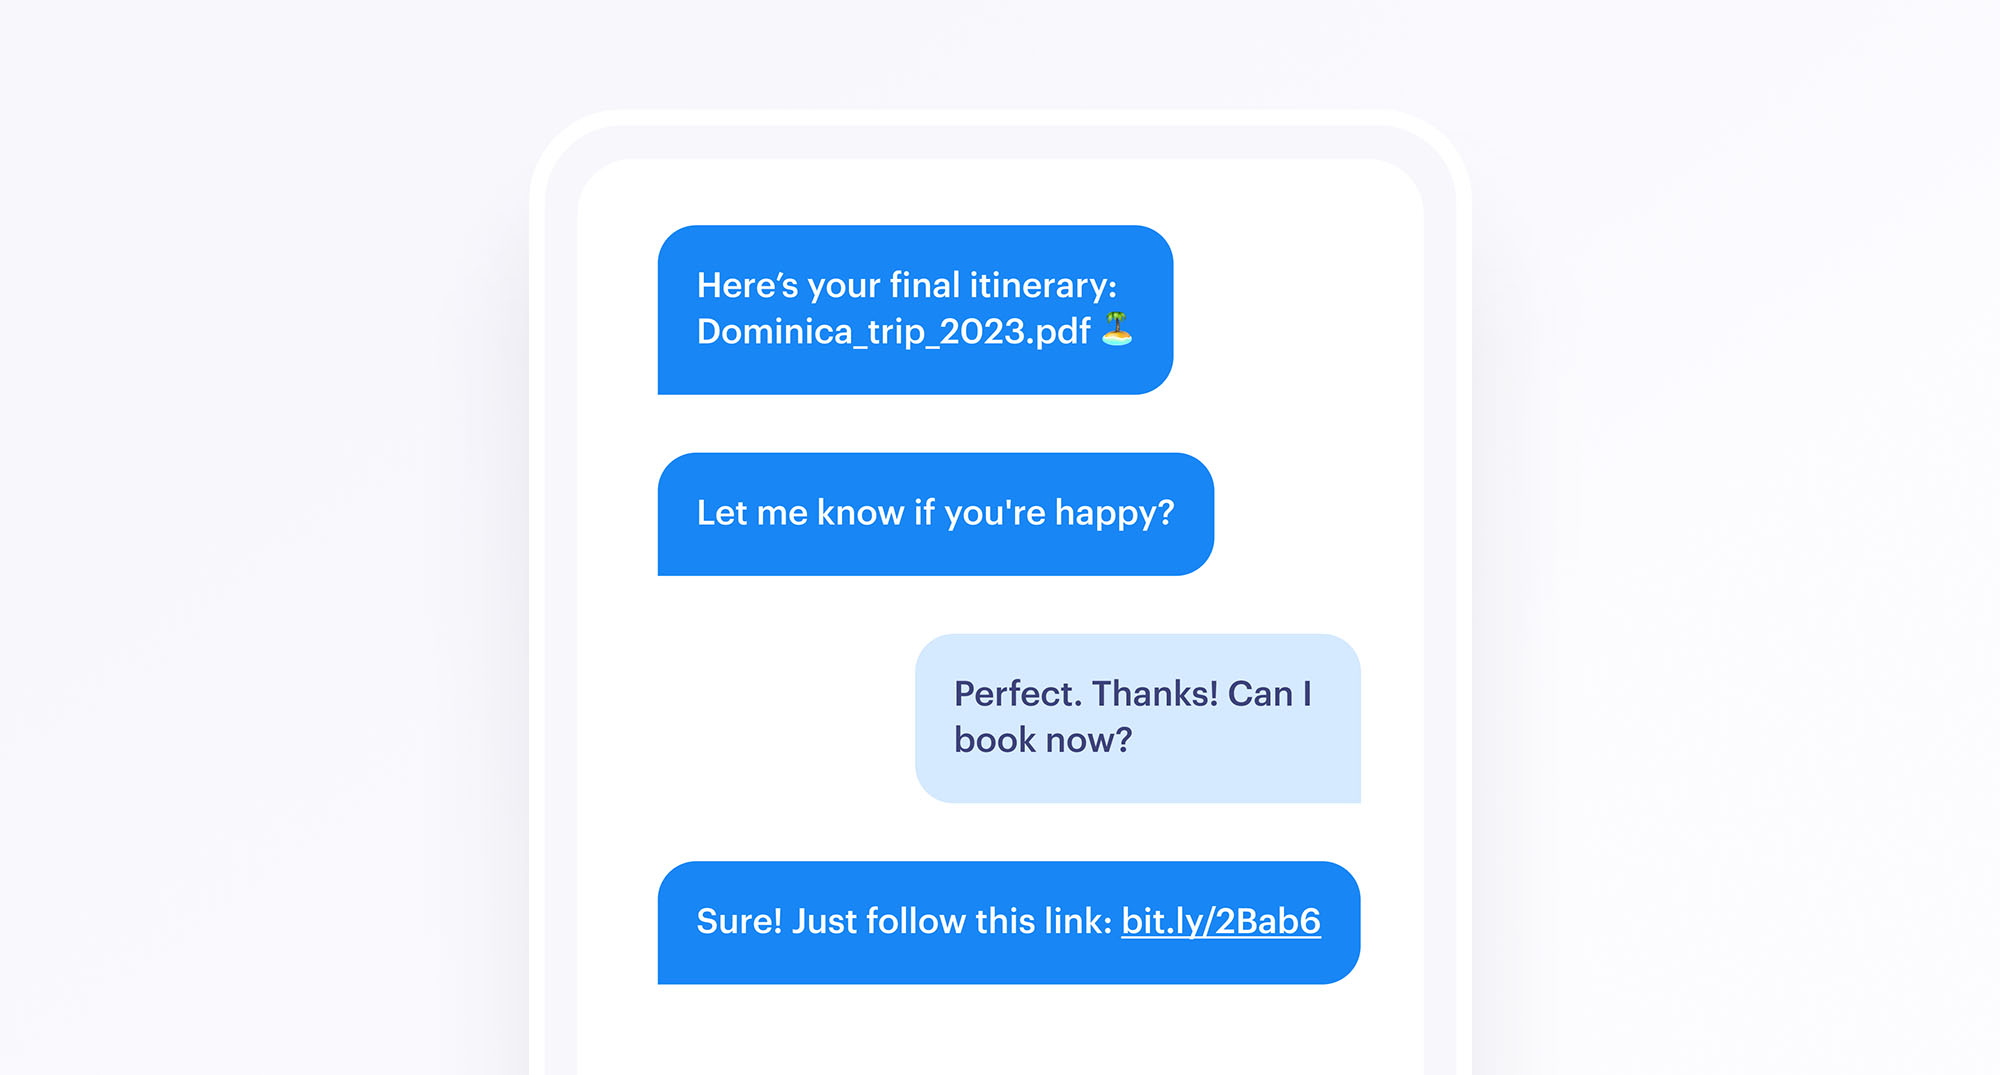 Pay by Link is ideally suited to live chat and chatbots